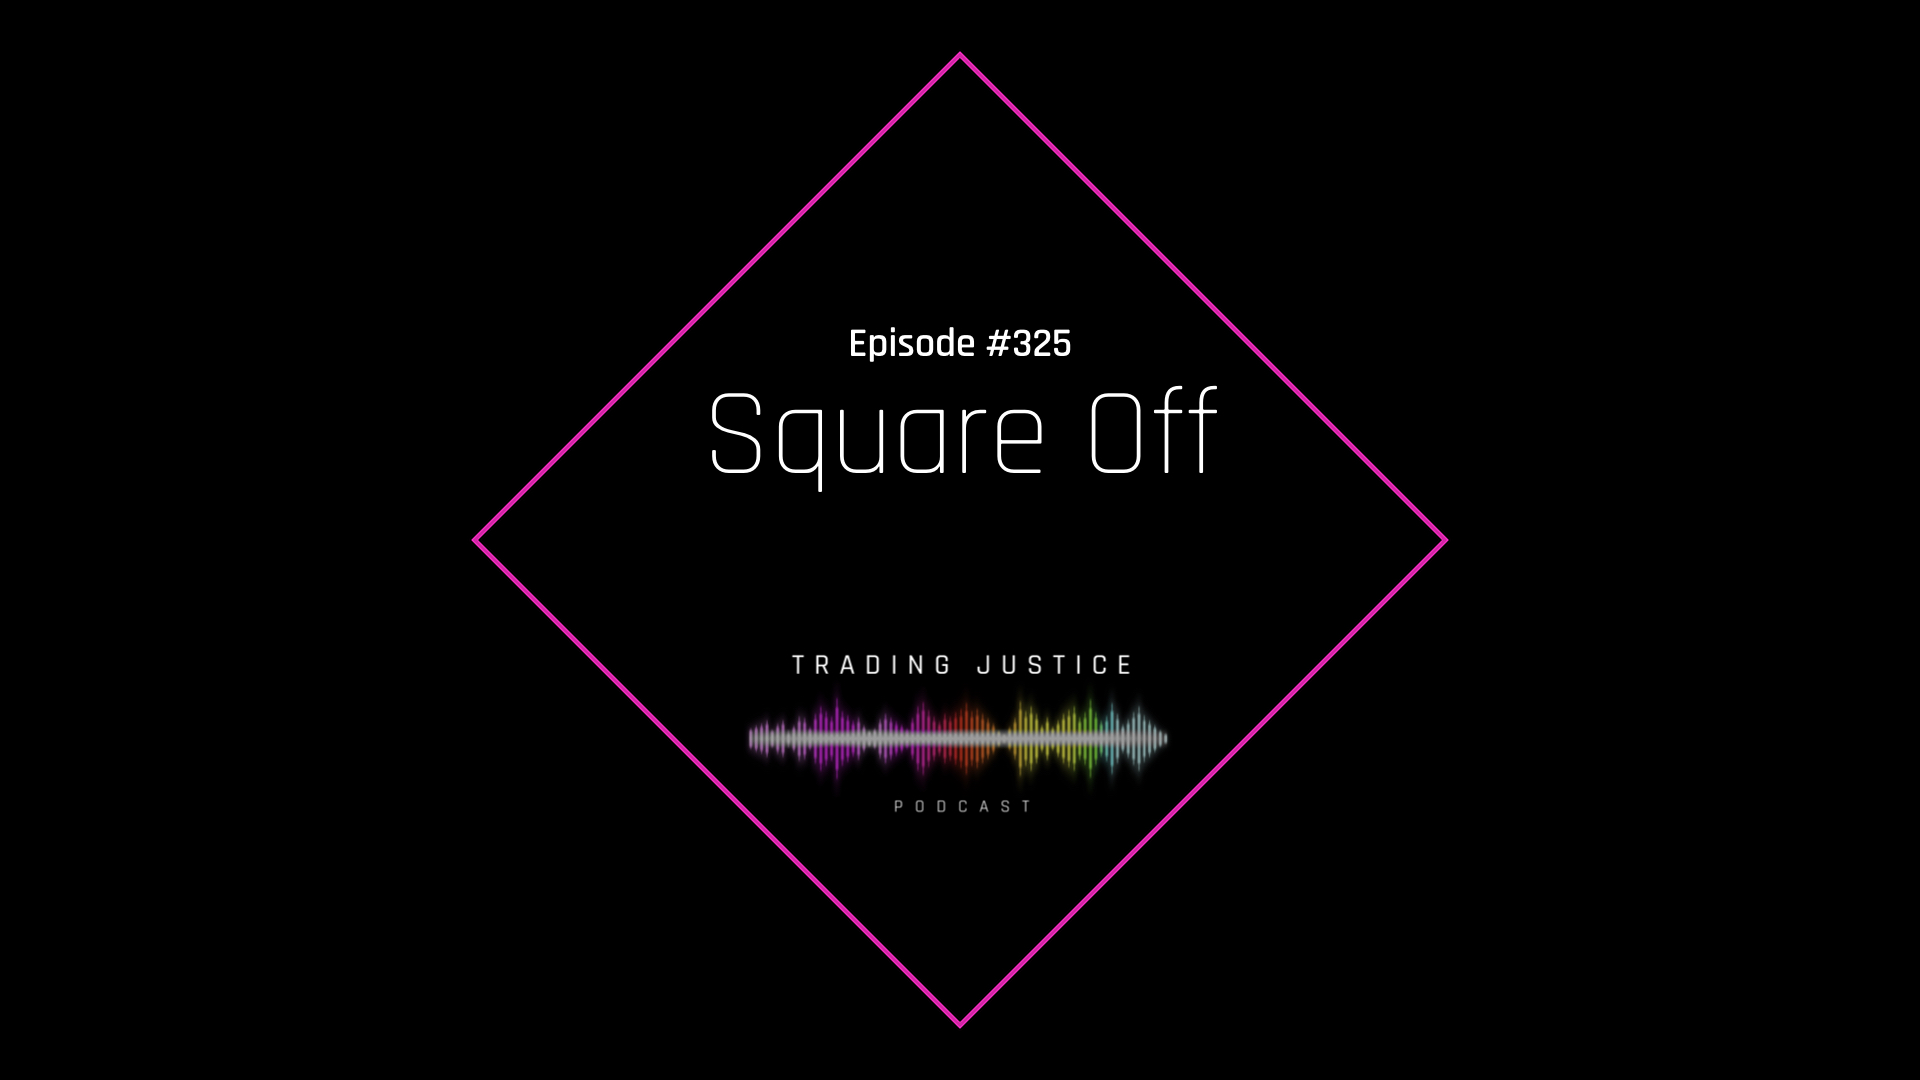 Trading Justice Episode 325: Square Off